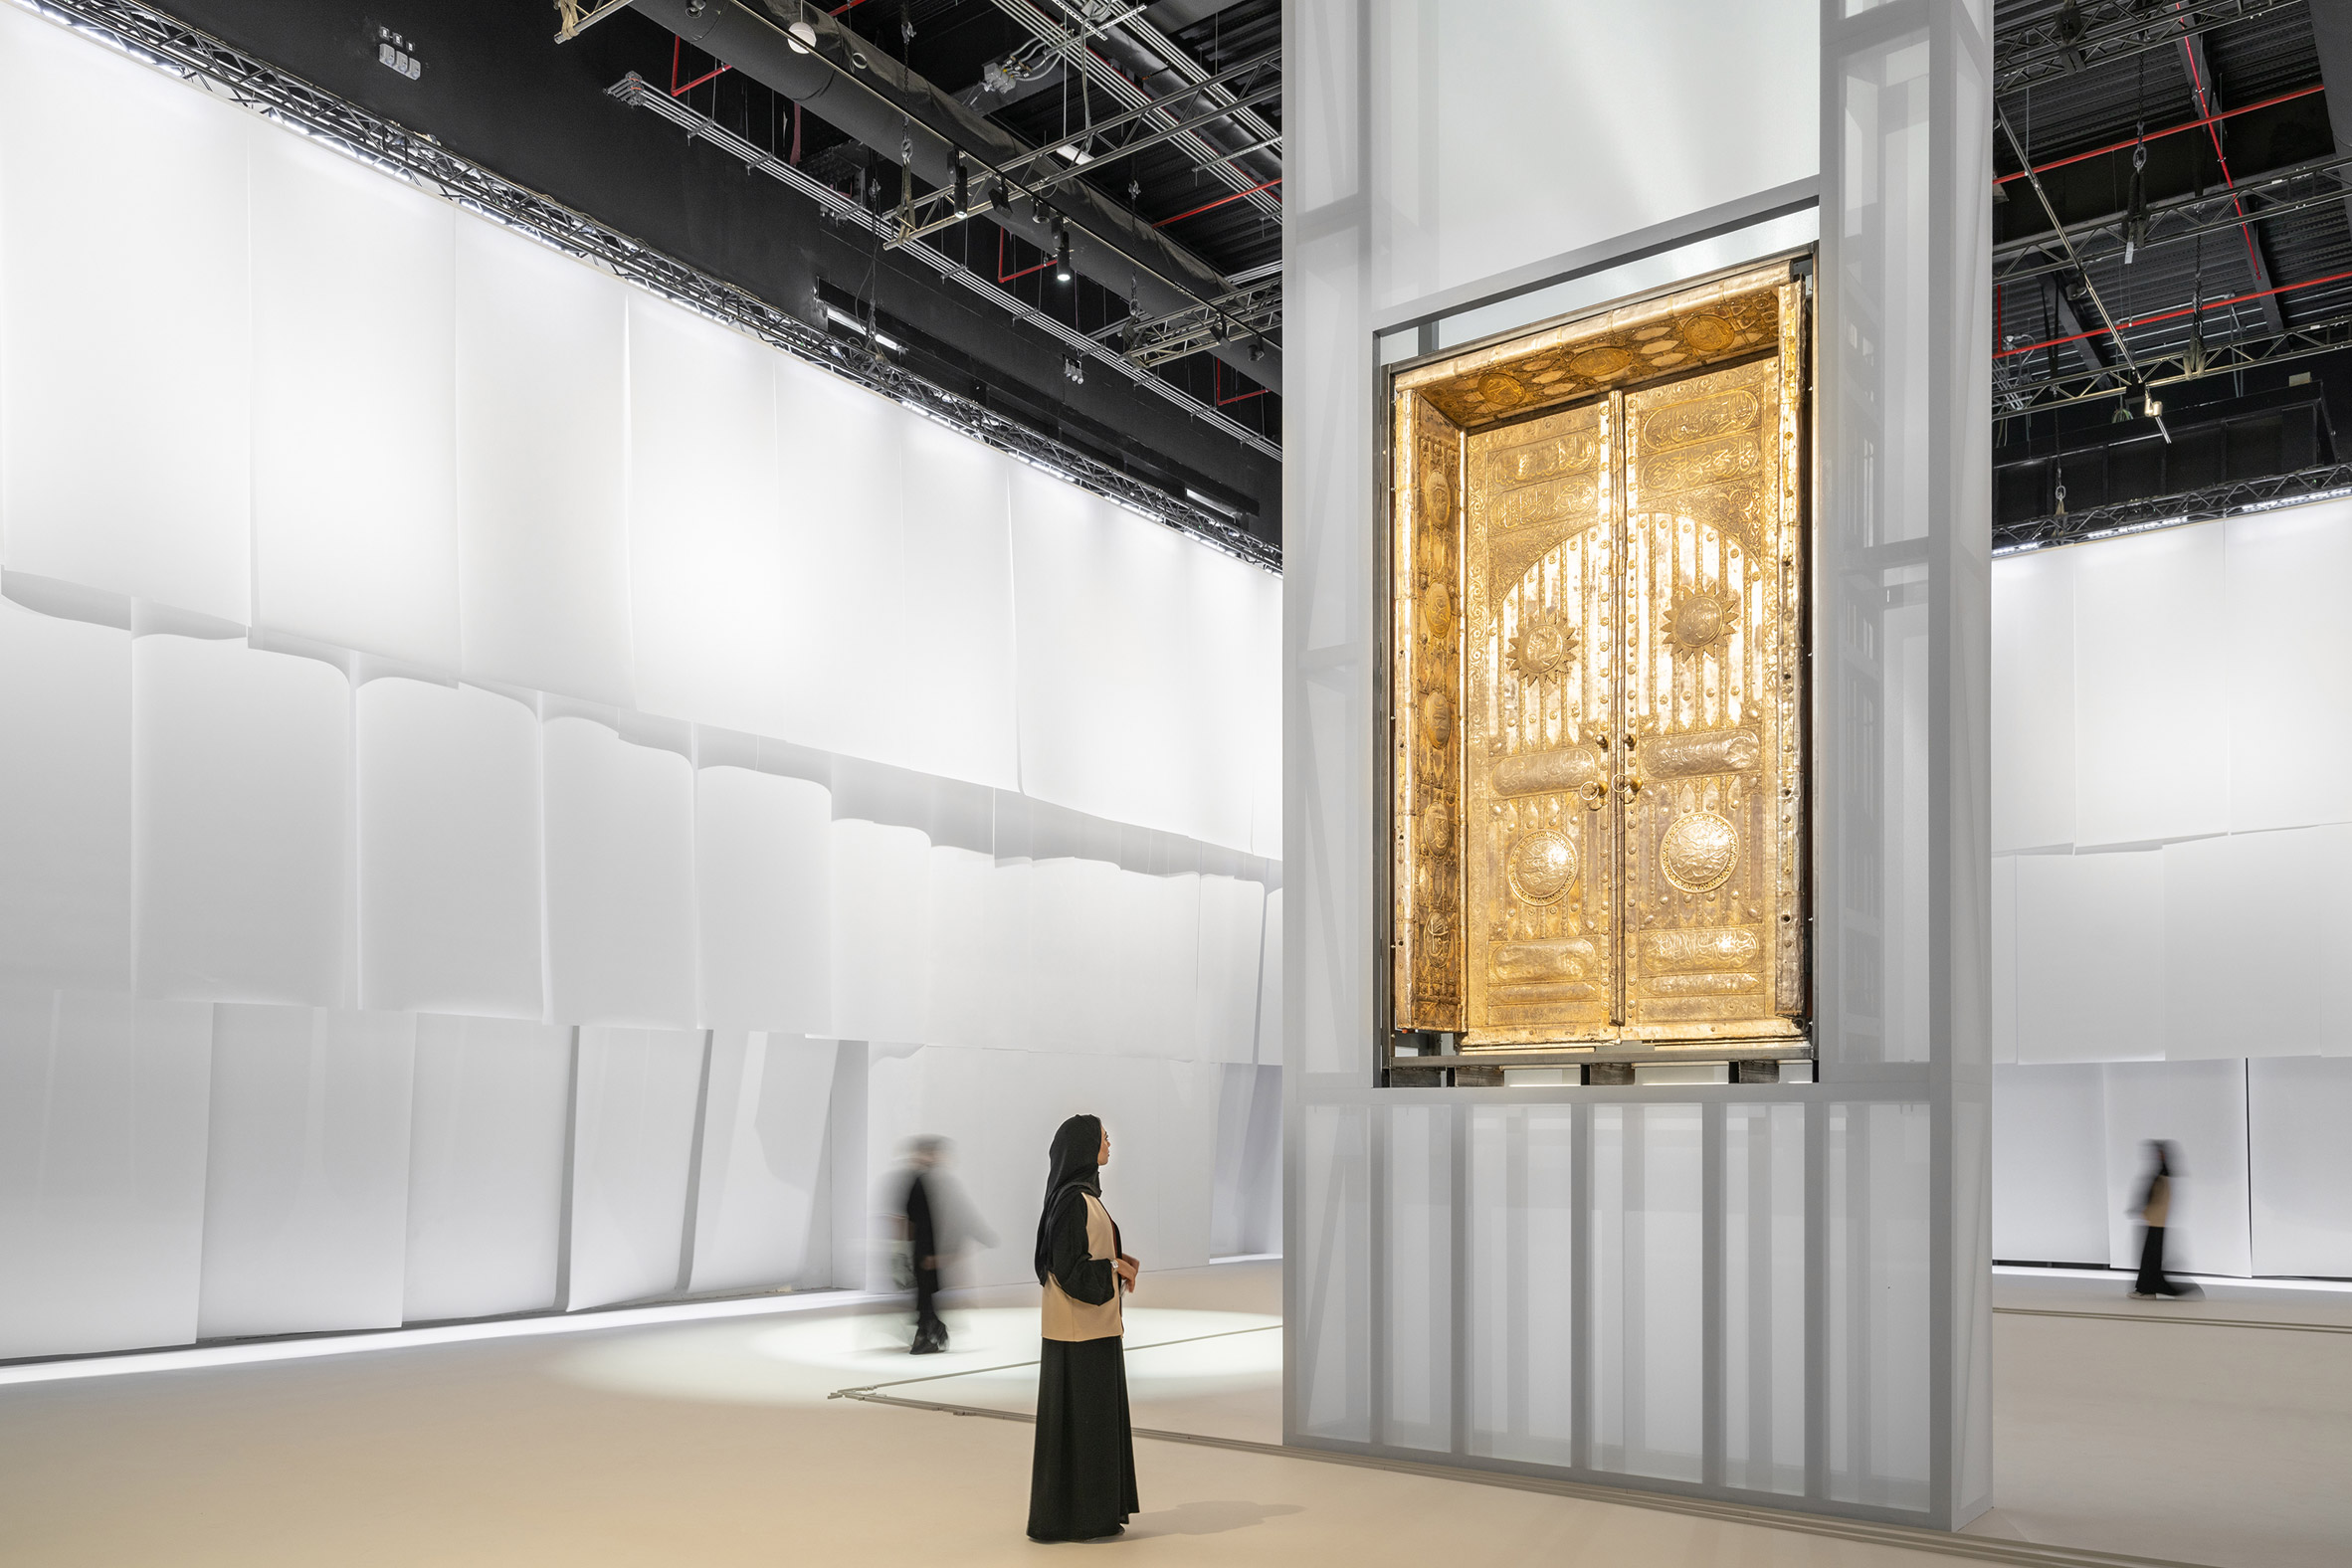 The first door of the Kaaba in an exhibition